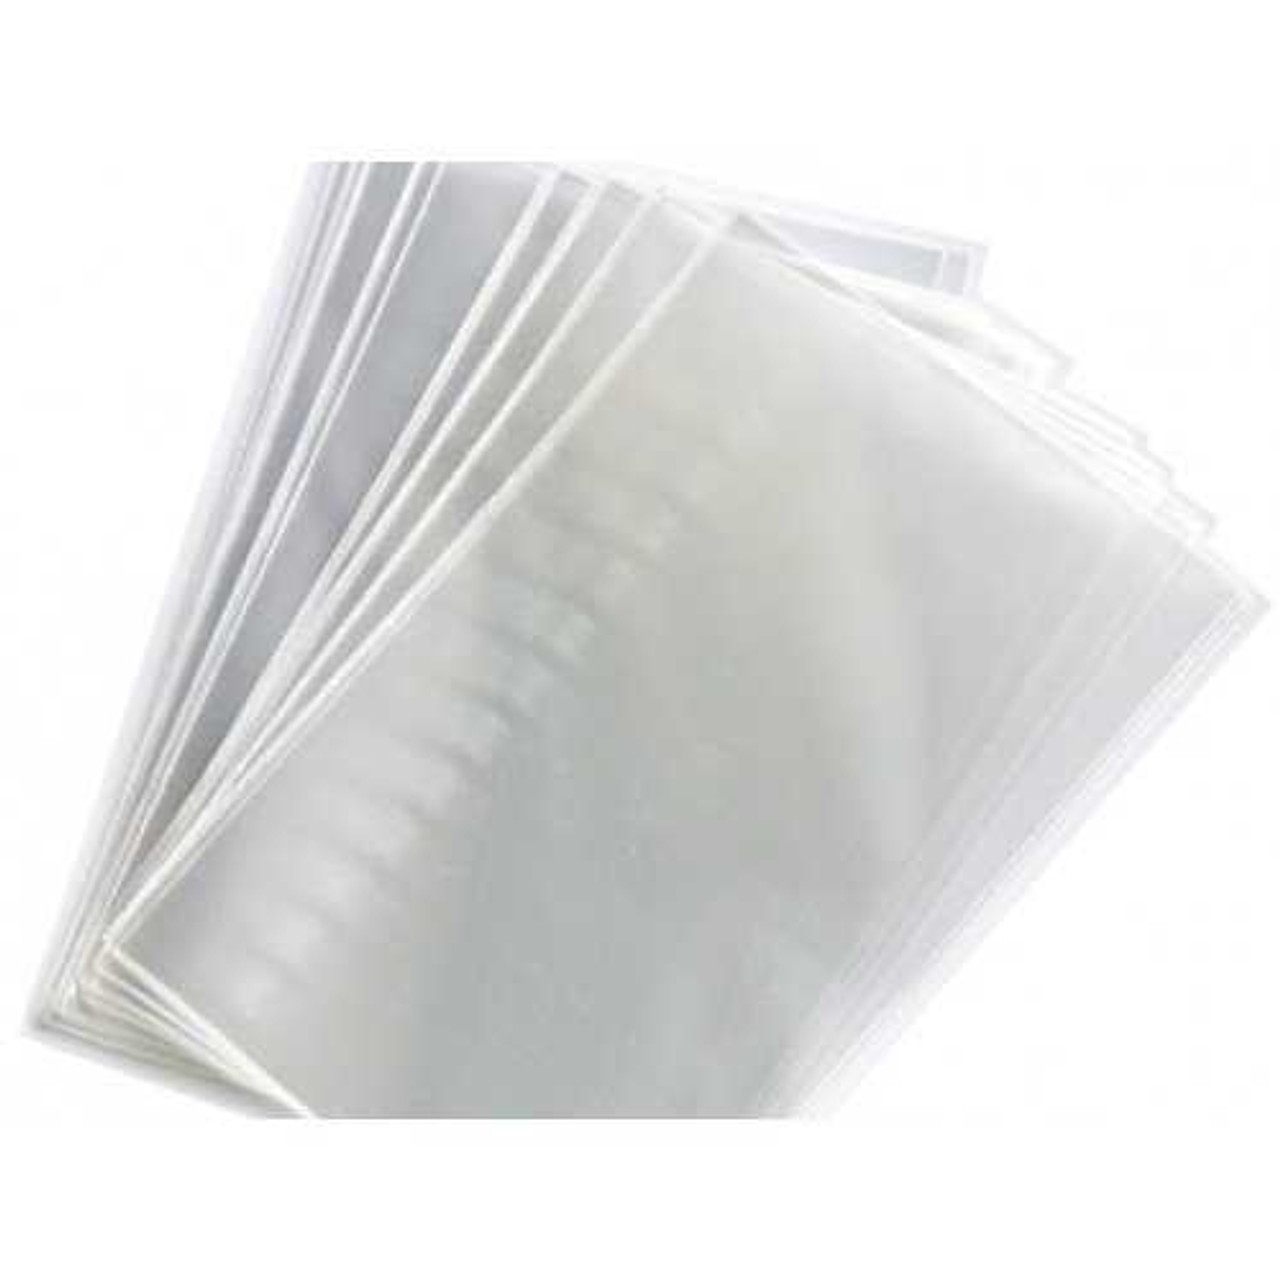 https://cdn11.bigcommerce.com/s-1ybtx/images/stencil/1280x1280/products/263/5354/100-pcs-8x10-15-Mil-Flat-Clear-Poly-Bags-Crystal-Clear-Bags-Cello-heat-seal_628__58781.1699987714.jpg?c=2?imbypass=on